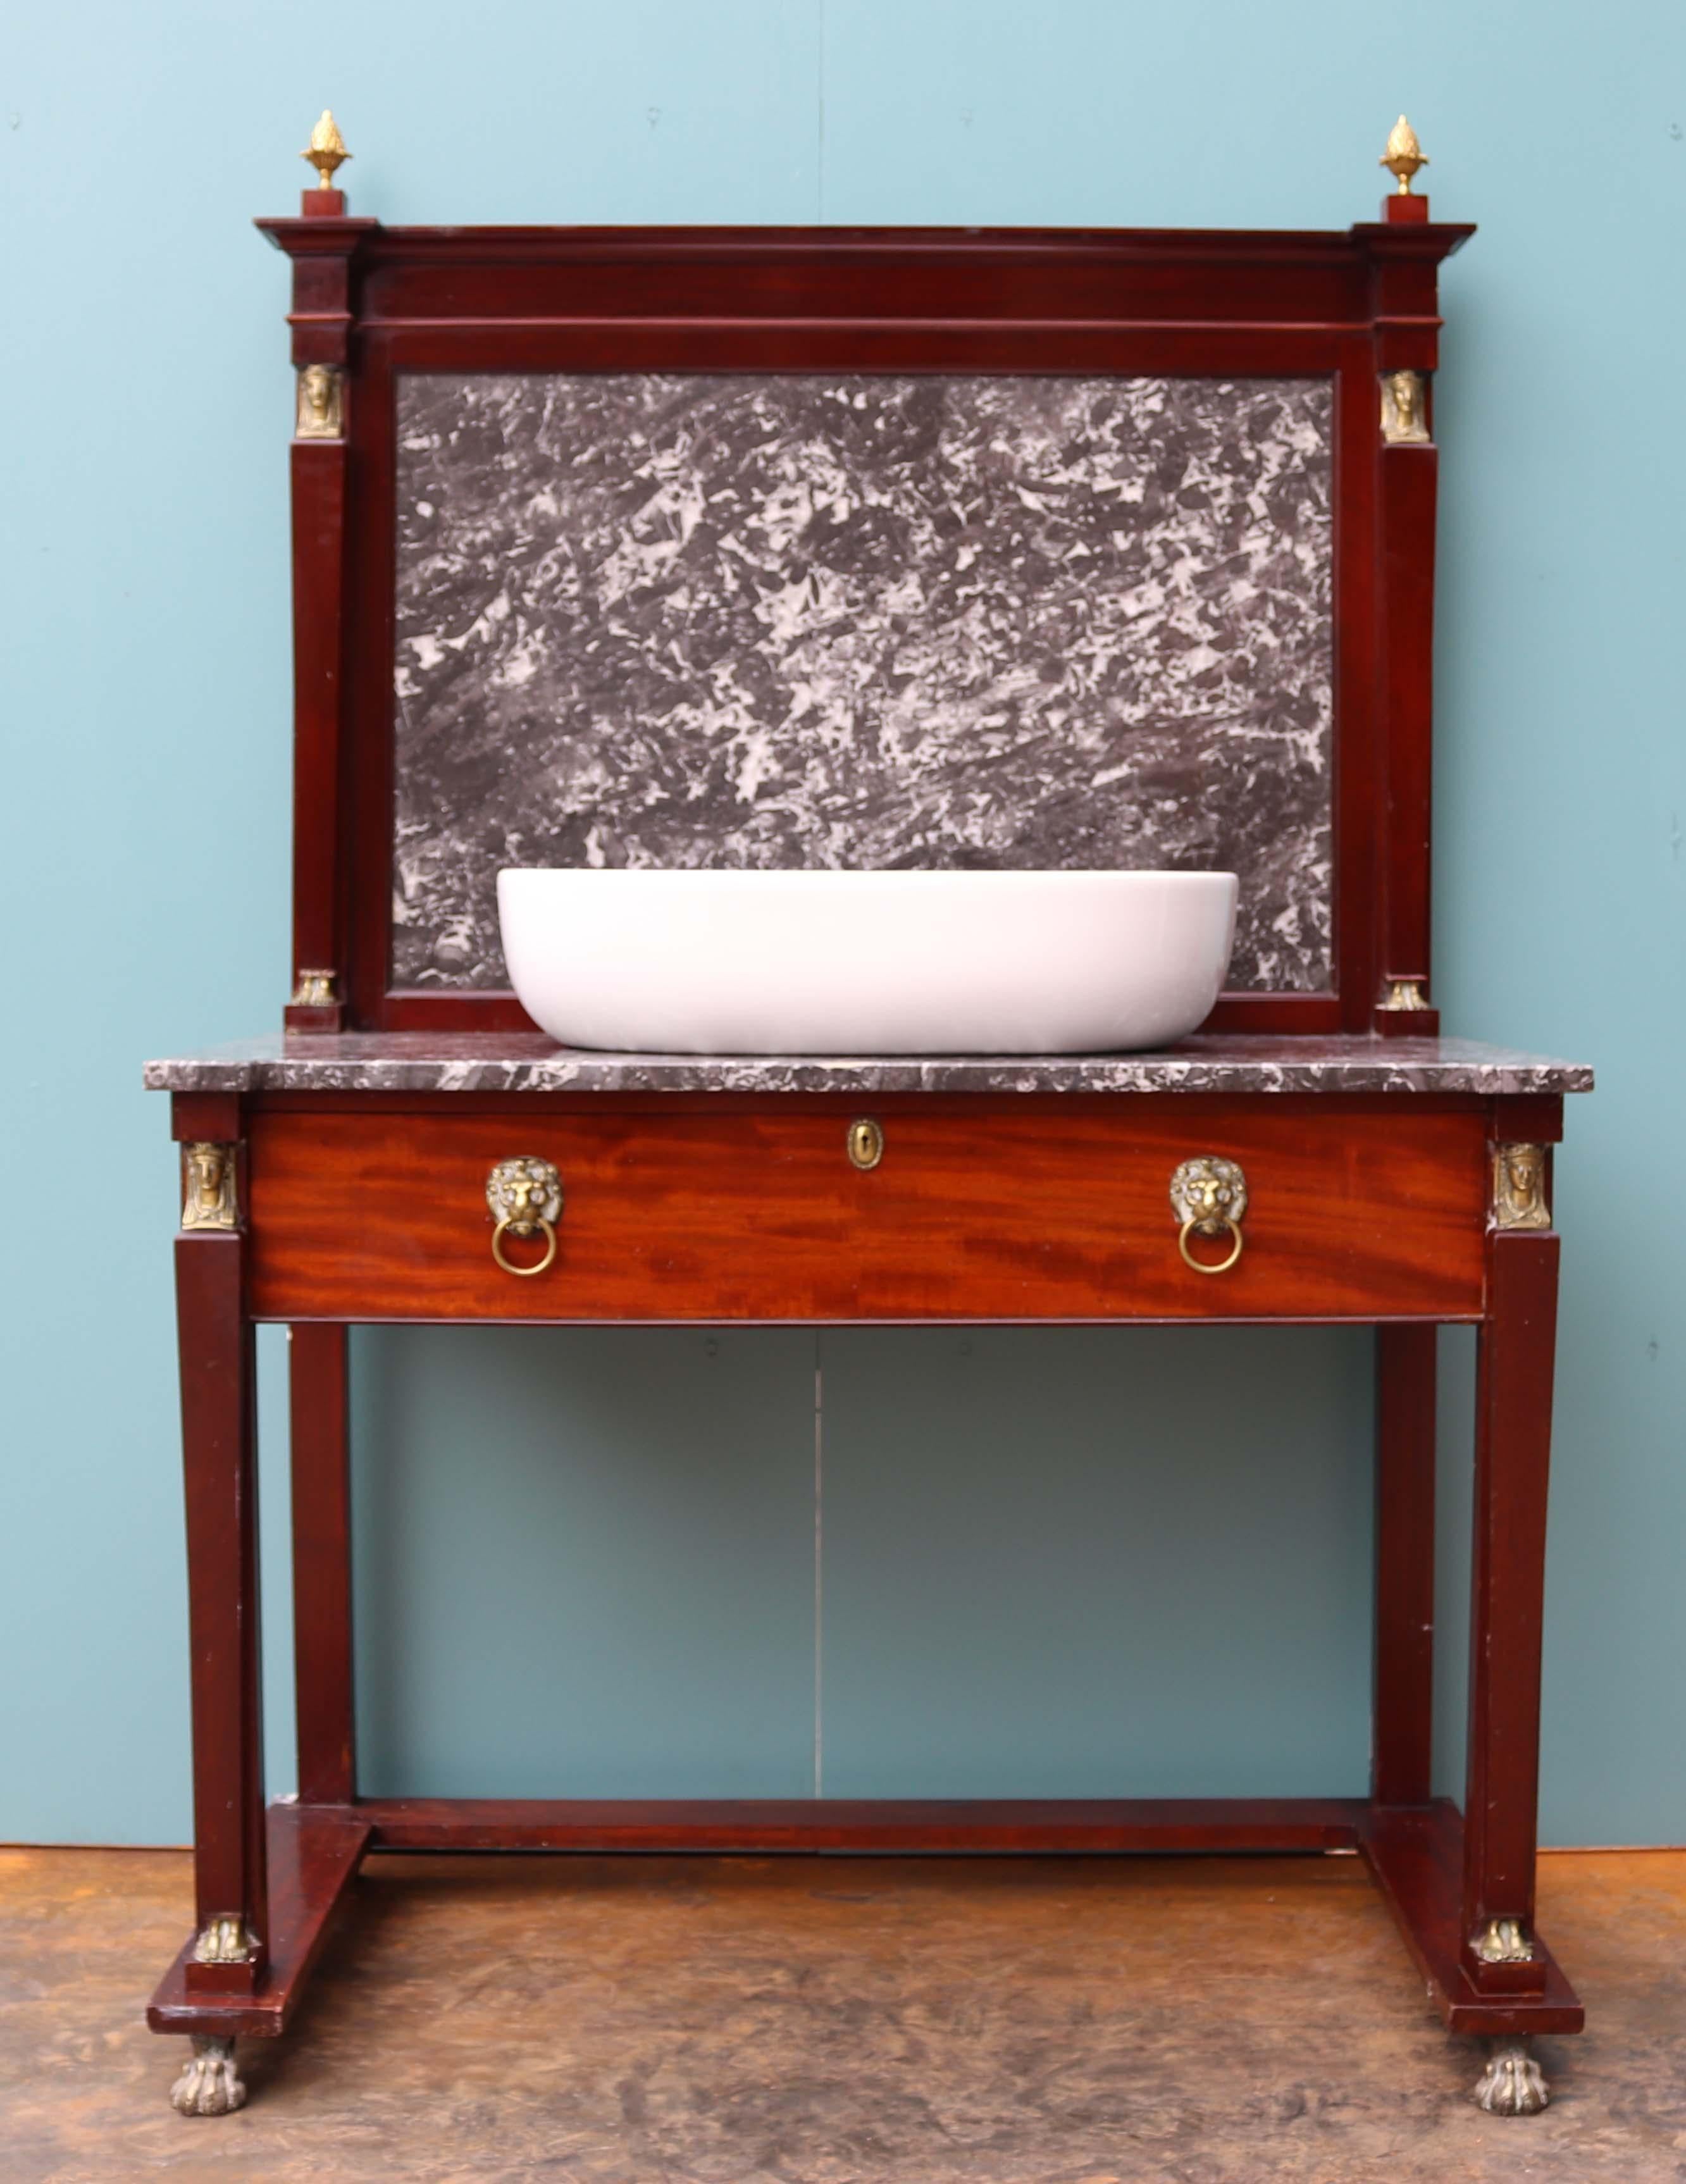 About

This beautiful washstand is made from mahogany and a grey/white marble with brass embellishments in the Egyptian taste. The basin is made from porcelain but has not been fitted . 

We have paired this original wash stand with a modern